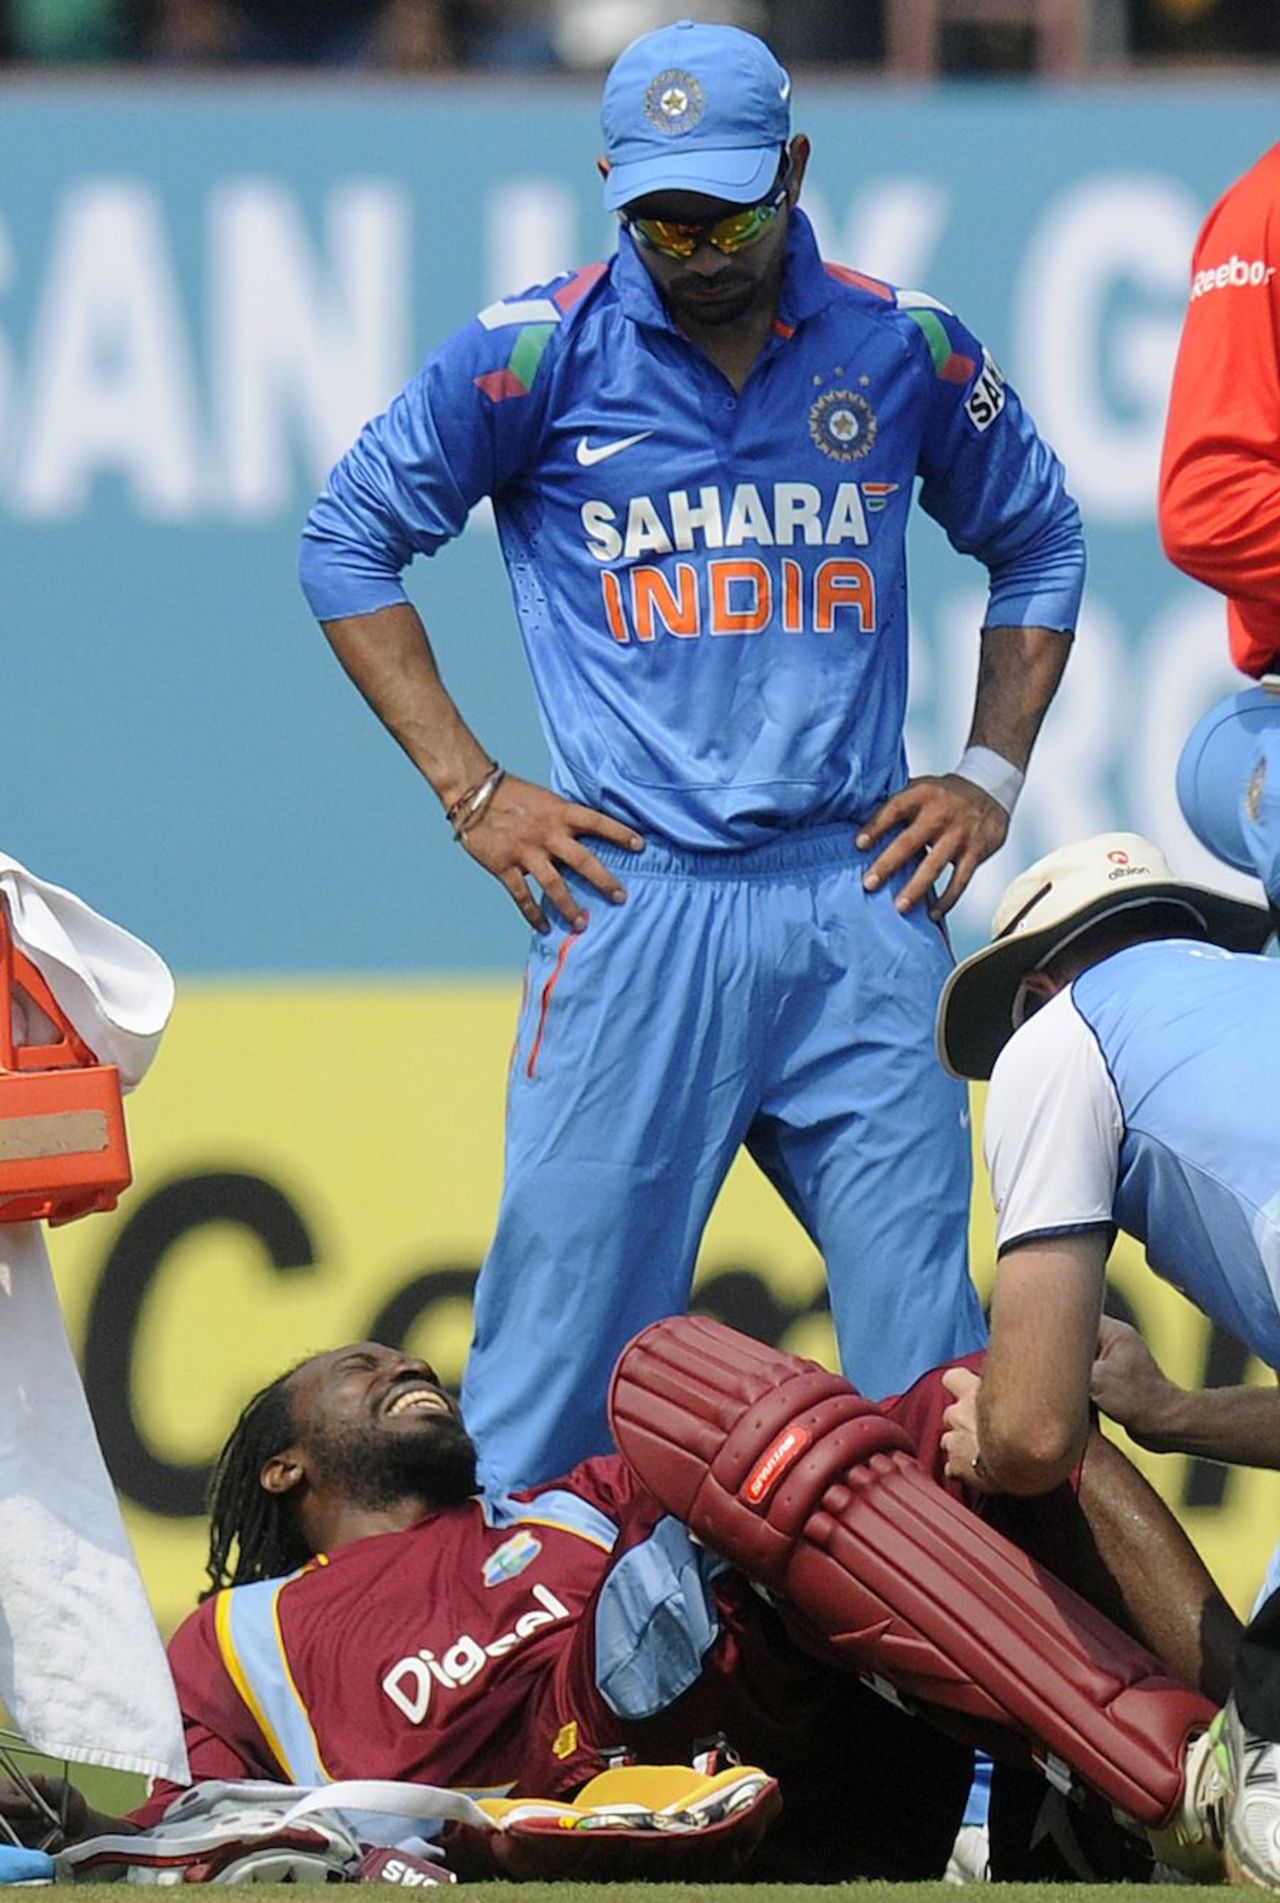 Chris Gayle was in pain after his run out, India v West Indies, 1st ODI, Kochi, November 21, 2013